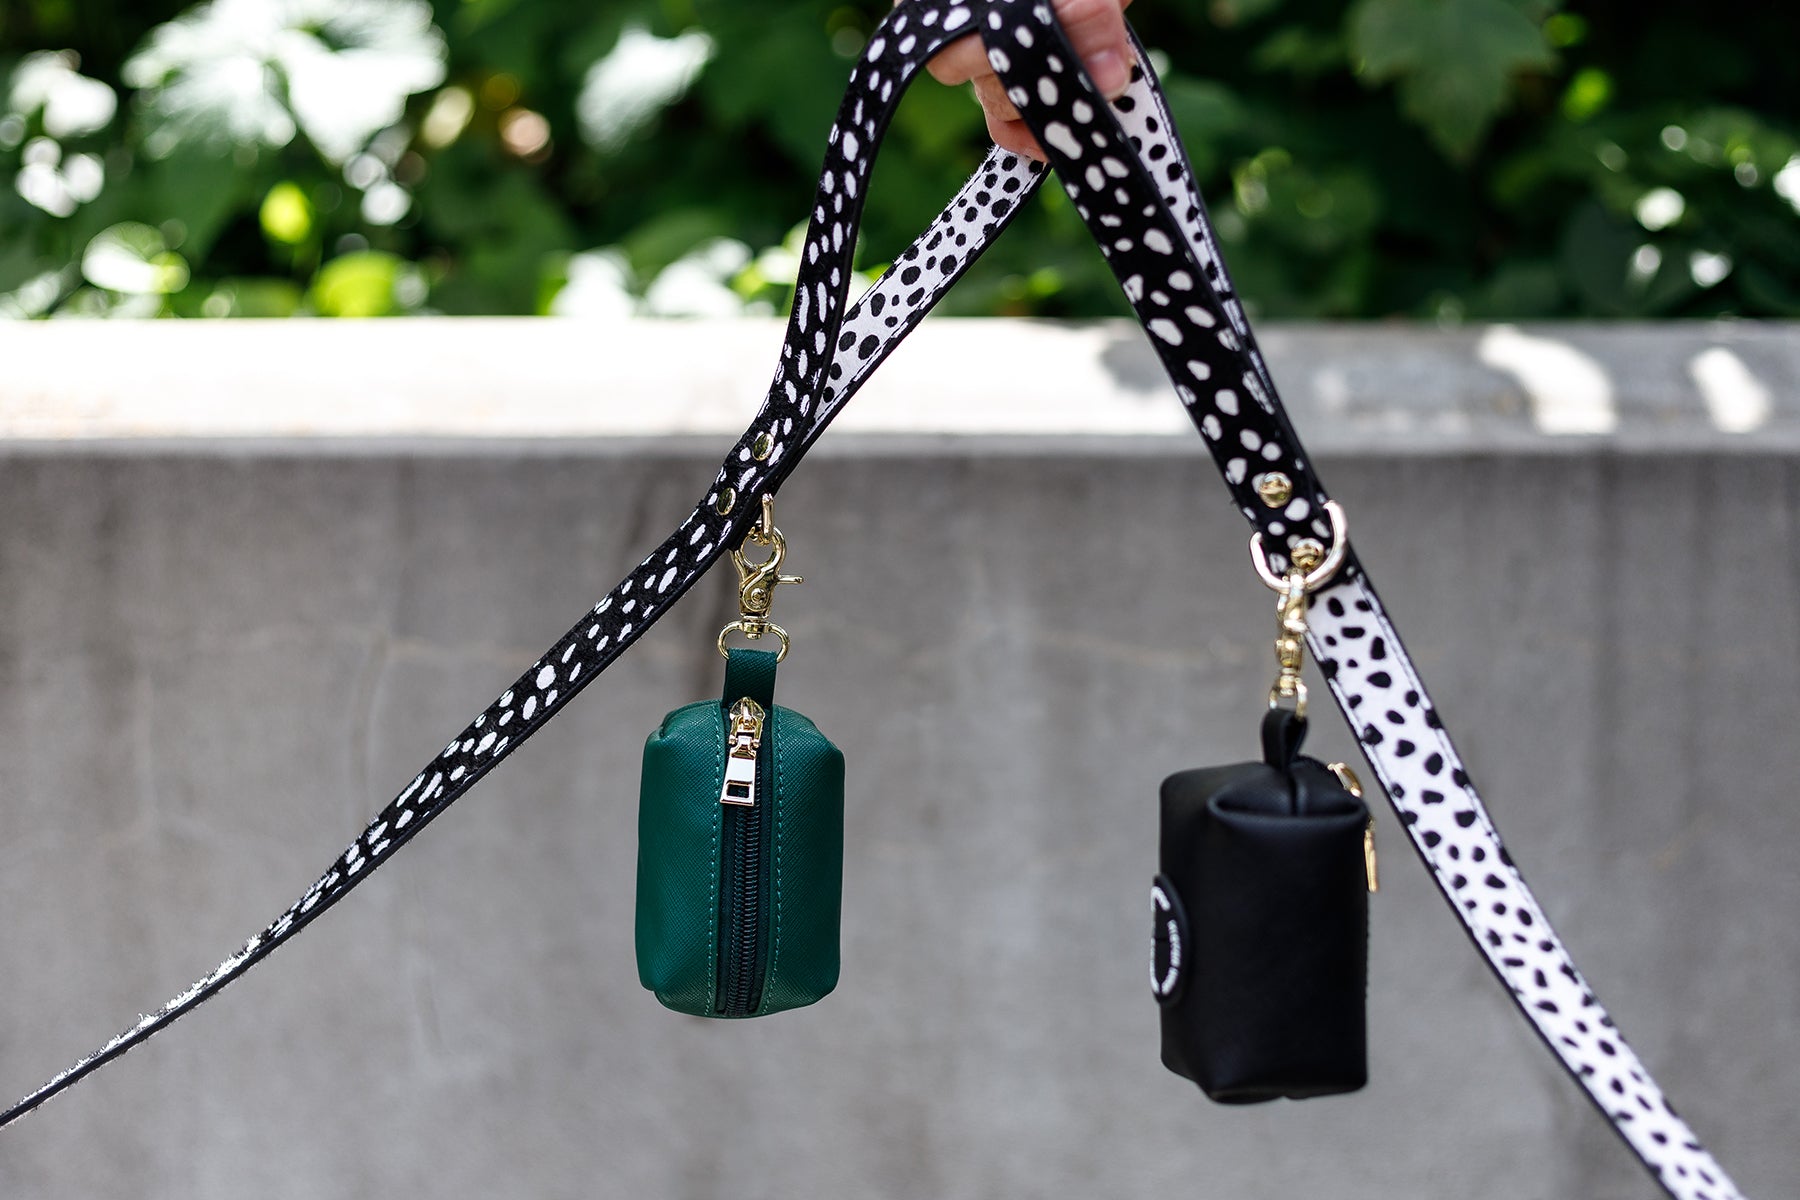 Mister Woof's Polka Dot Pet Leash pairs back perfectly with Mr Woof's Poo Bag Holder. Shop the leather pet collection.